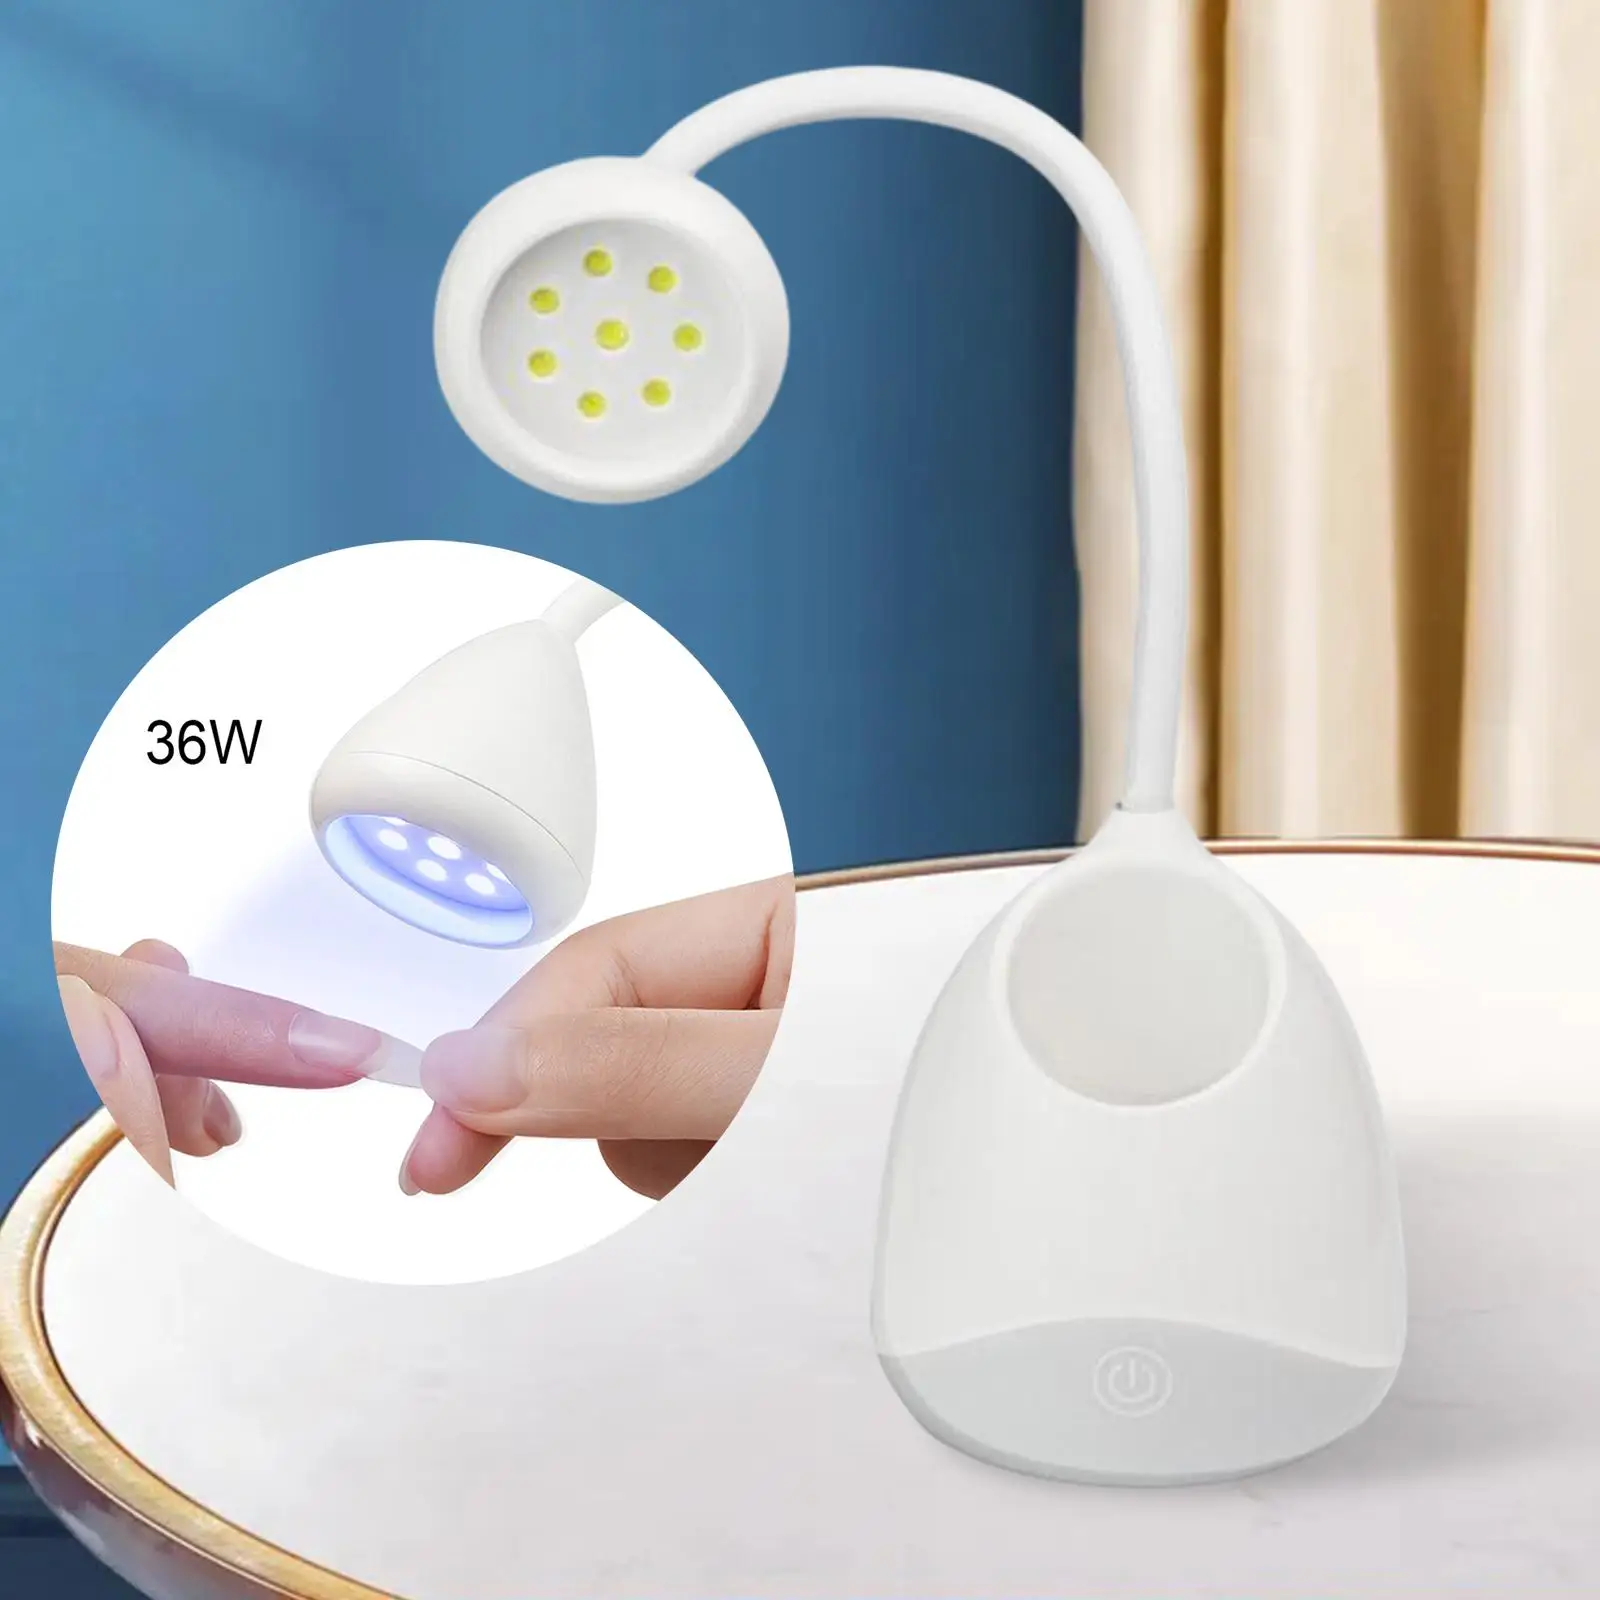 Portable LED Nail Lamp 36W Girl 60S Fast Dry Travel Storage Space - Battery, 9x20.2x9cm